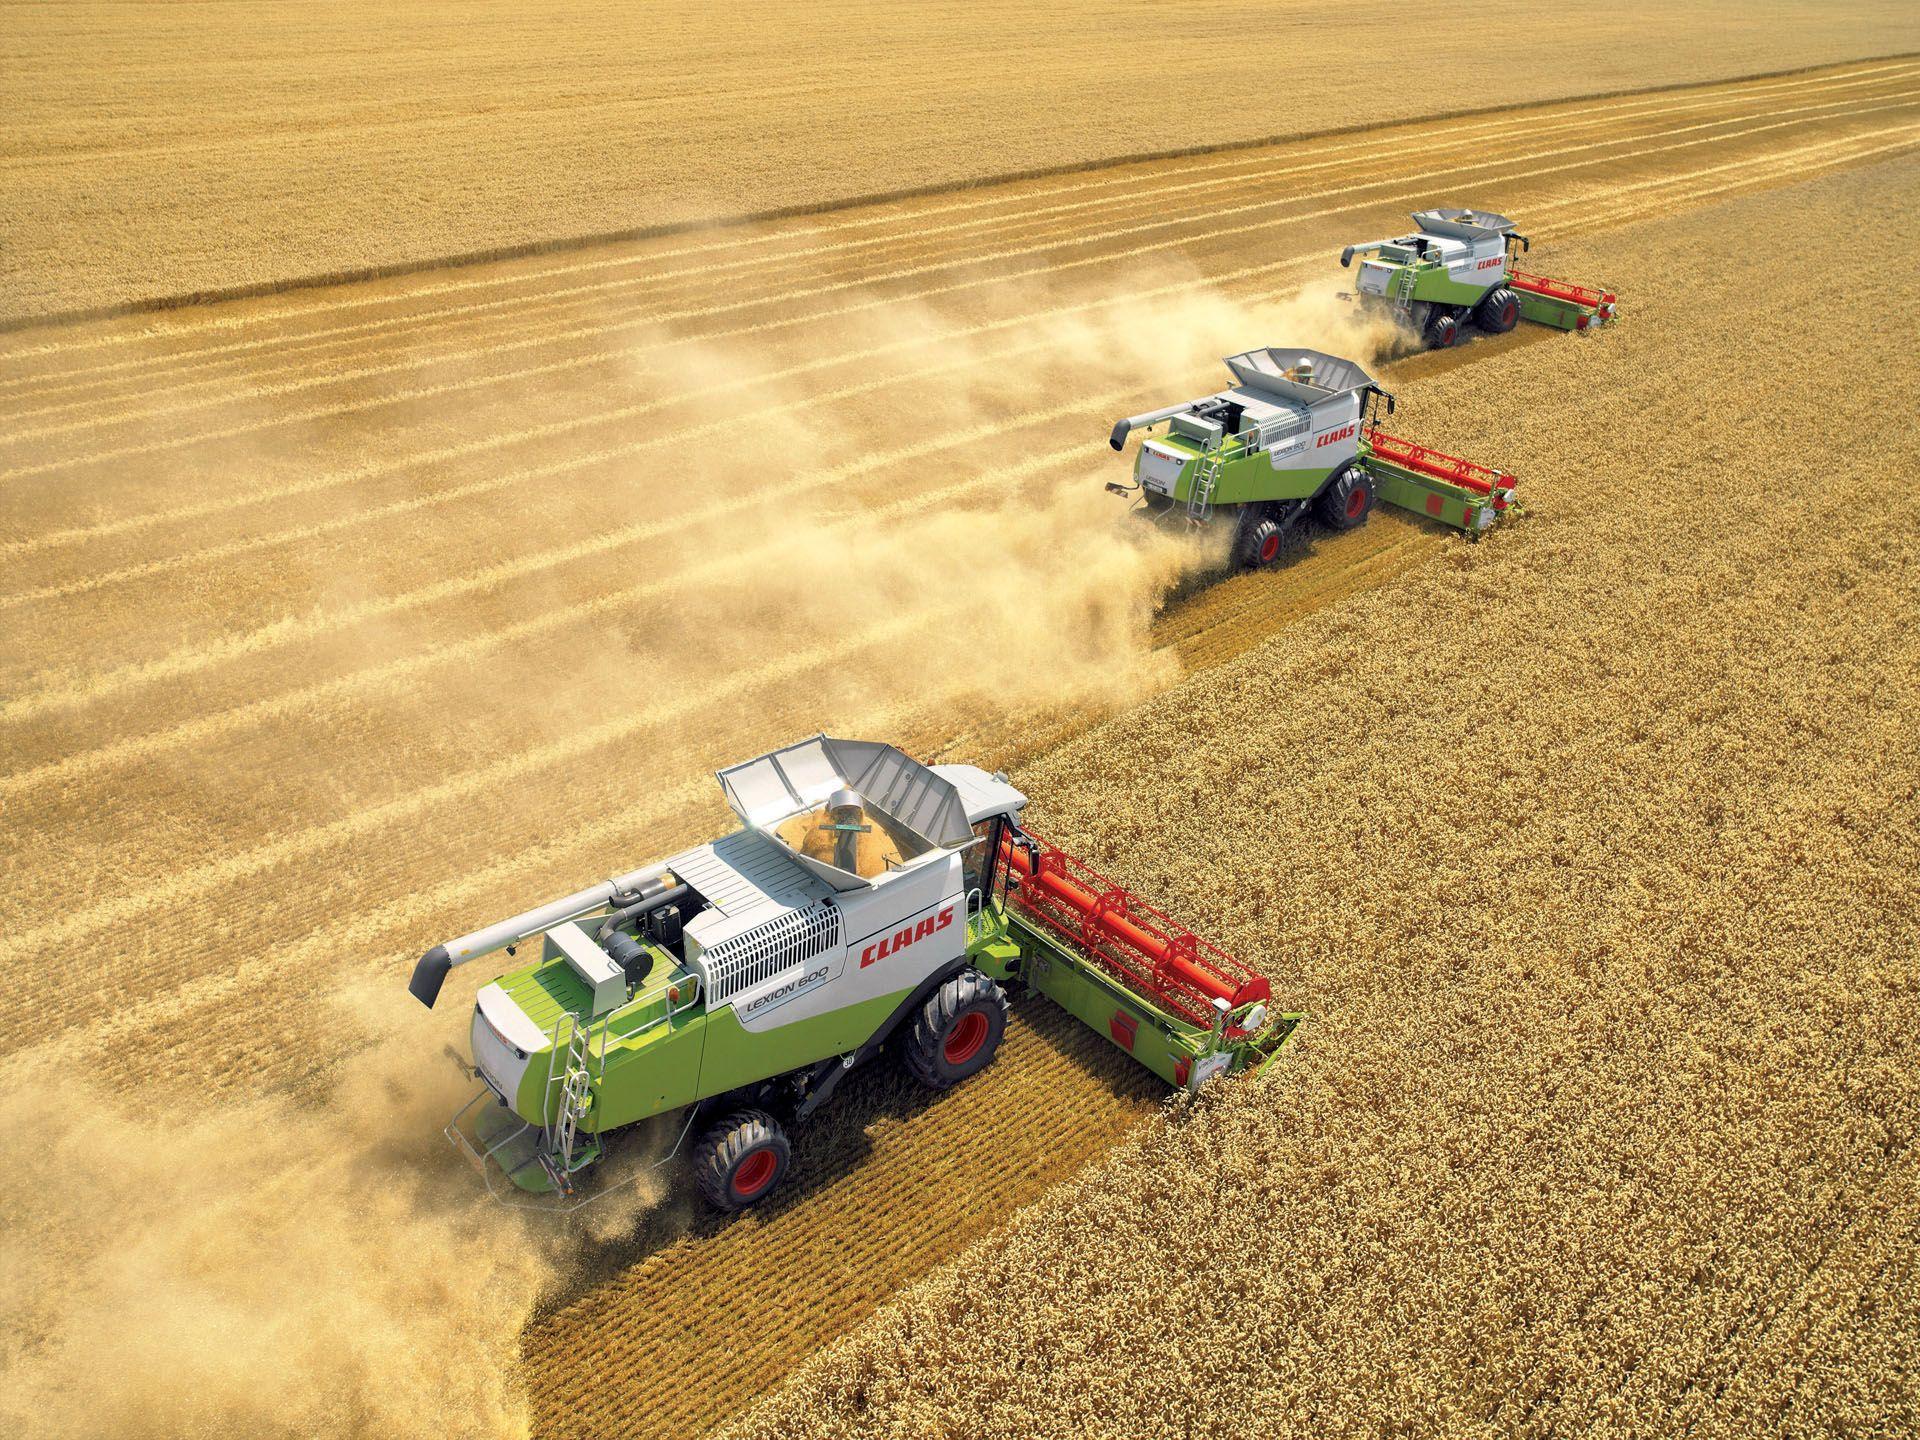 Claas Lexion picture # 54744. Claas photo gallery